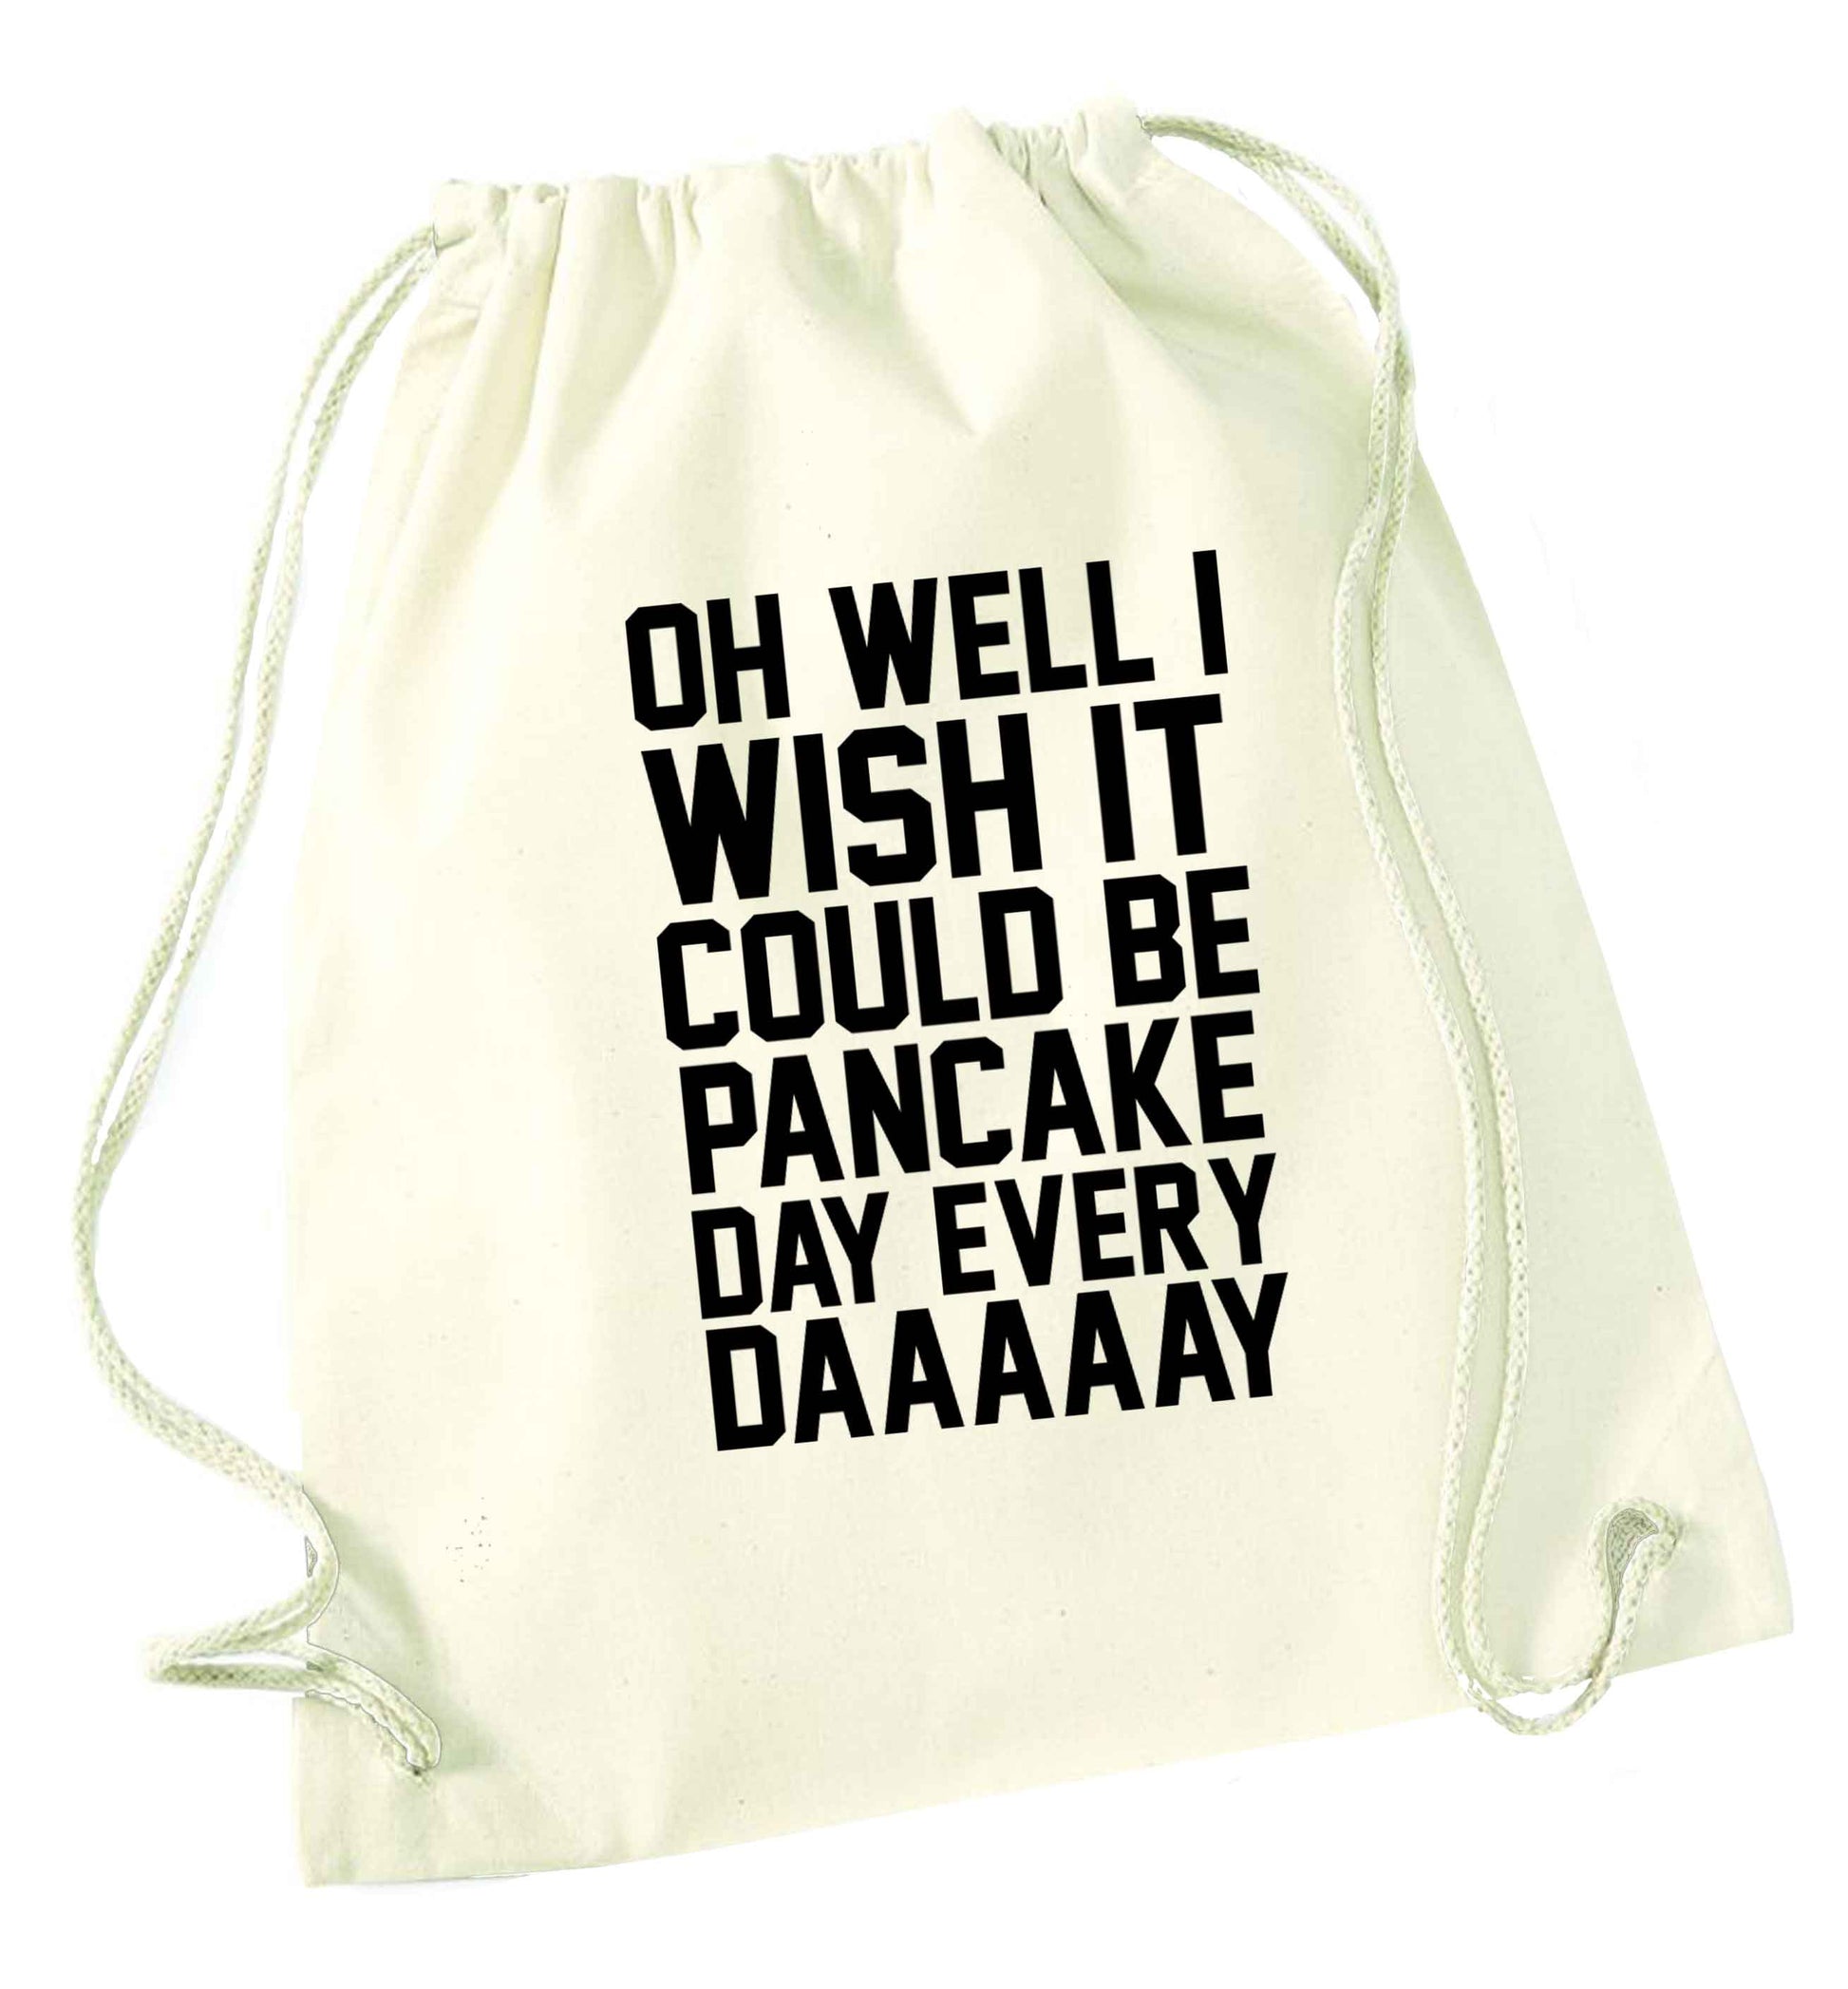 Oh well I wish it could be pancake day every day natural drawstring bag